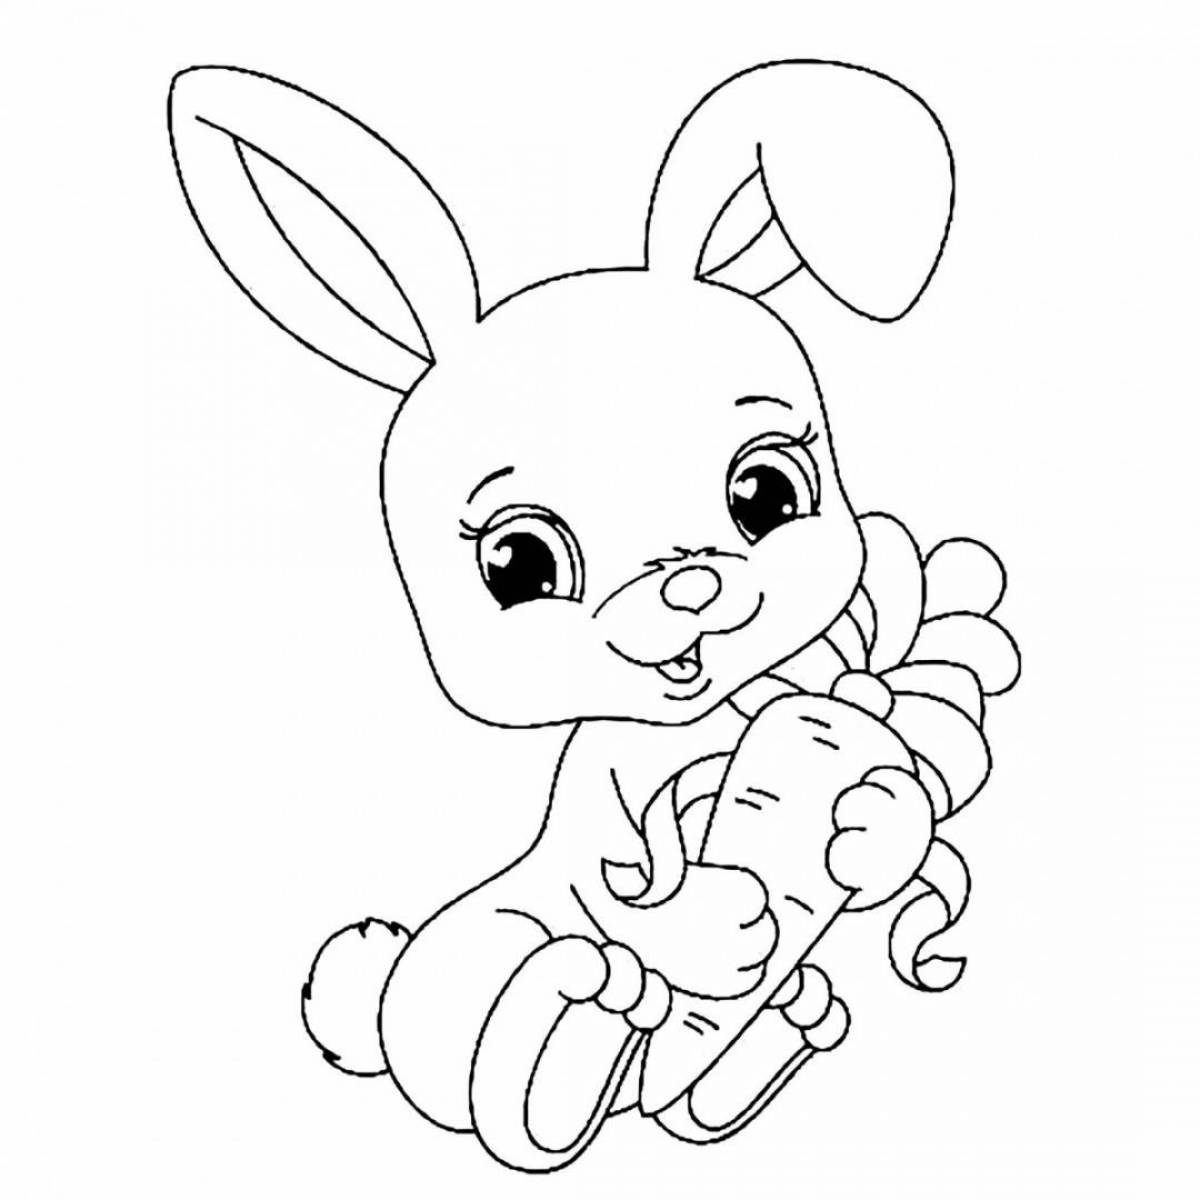 Smiling rabbit coloring book for kids